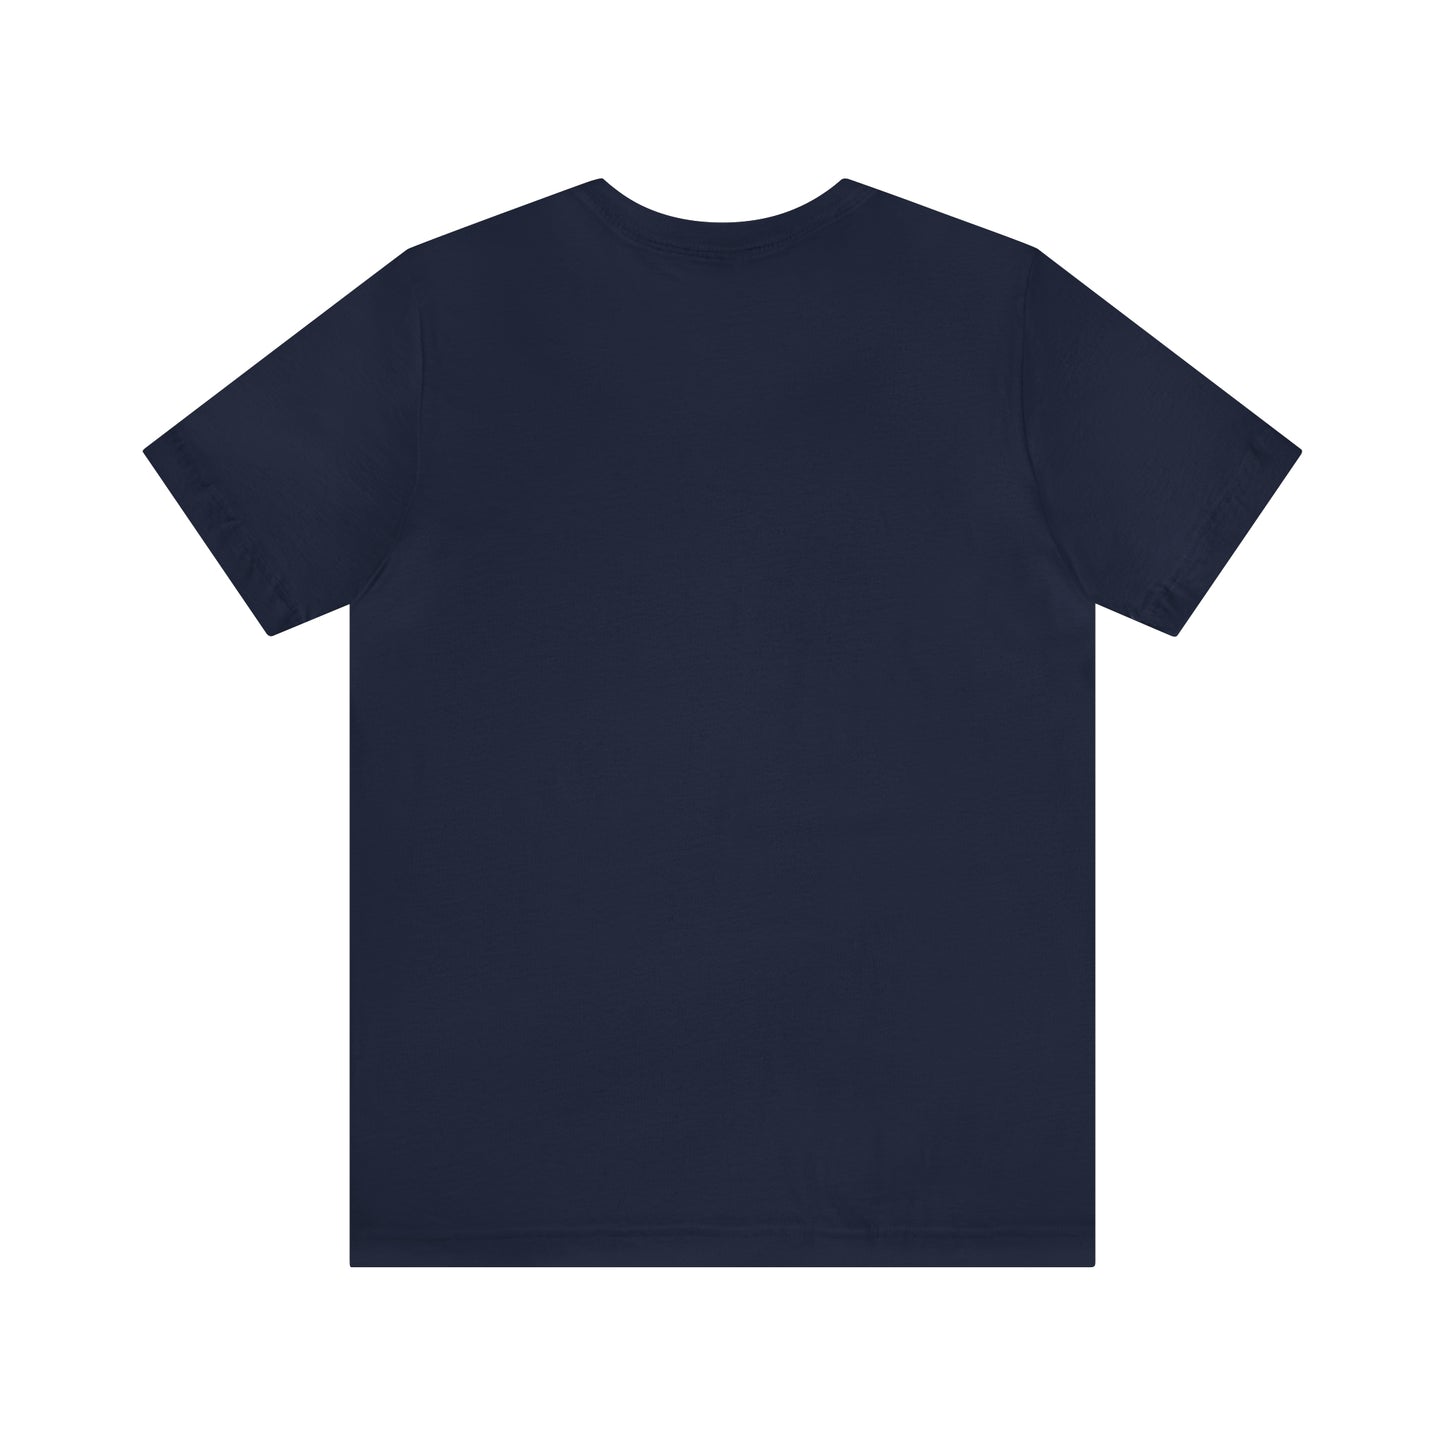 Master Your Style with Our Men's T-Shirt: Comfort and Versatility in Every Wear